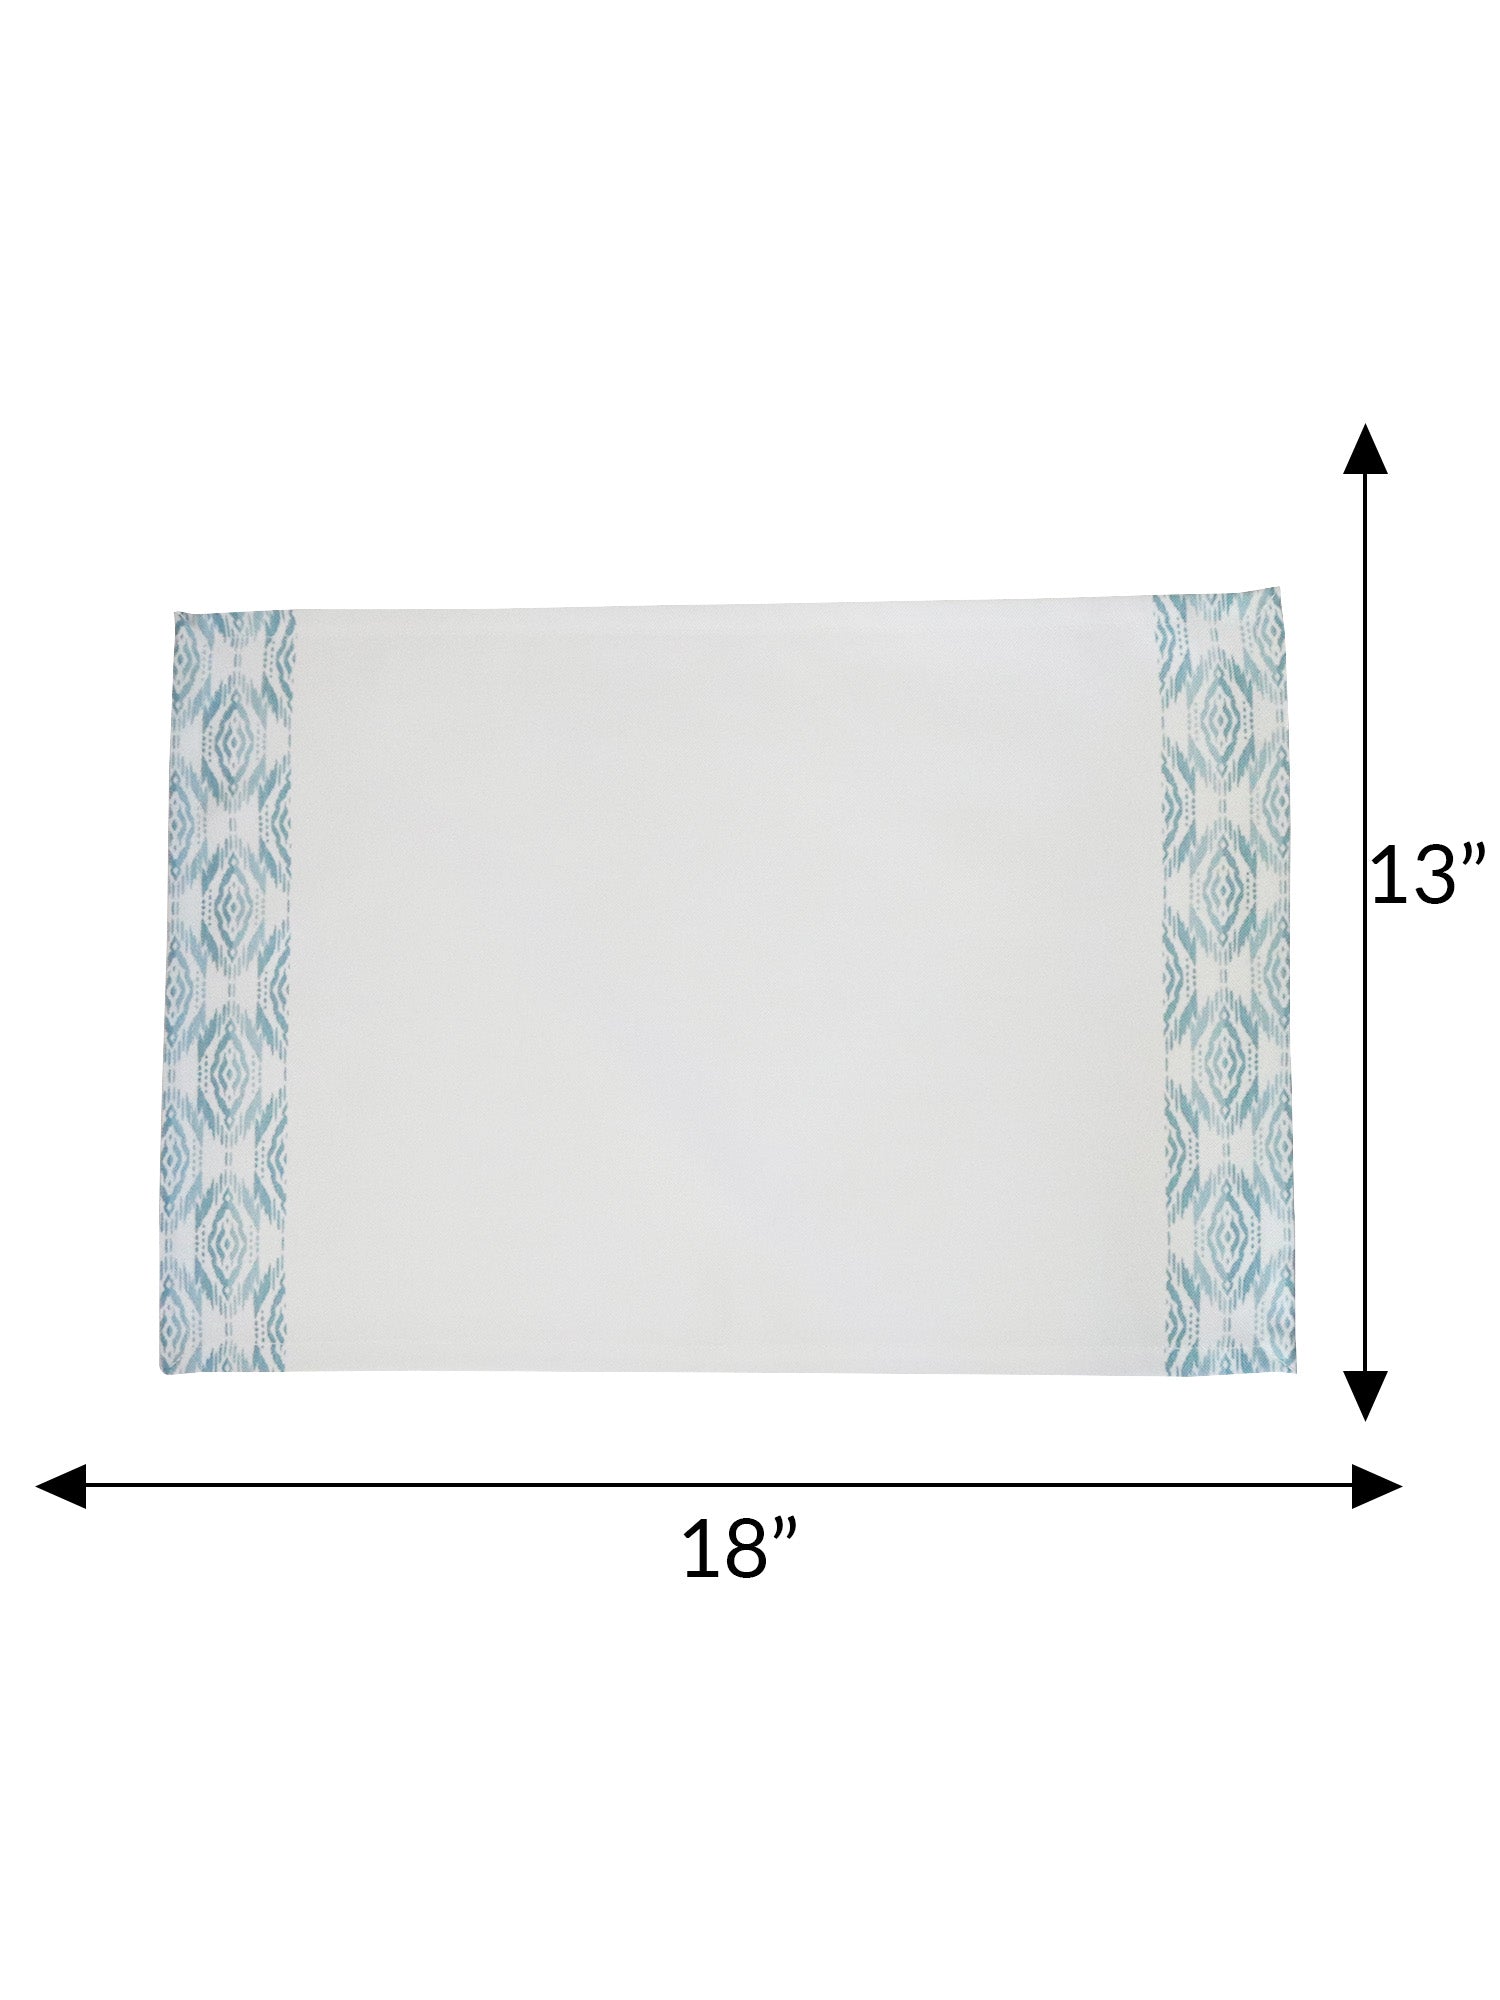 printed dinner placemats in light blue , set of 6 each  - 13x19 inch